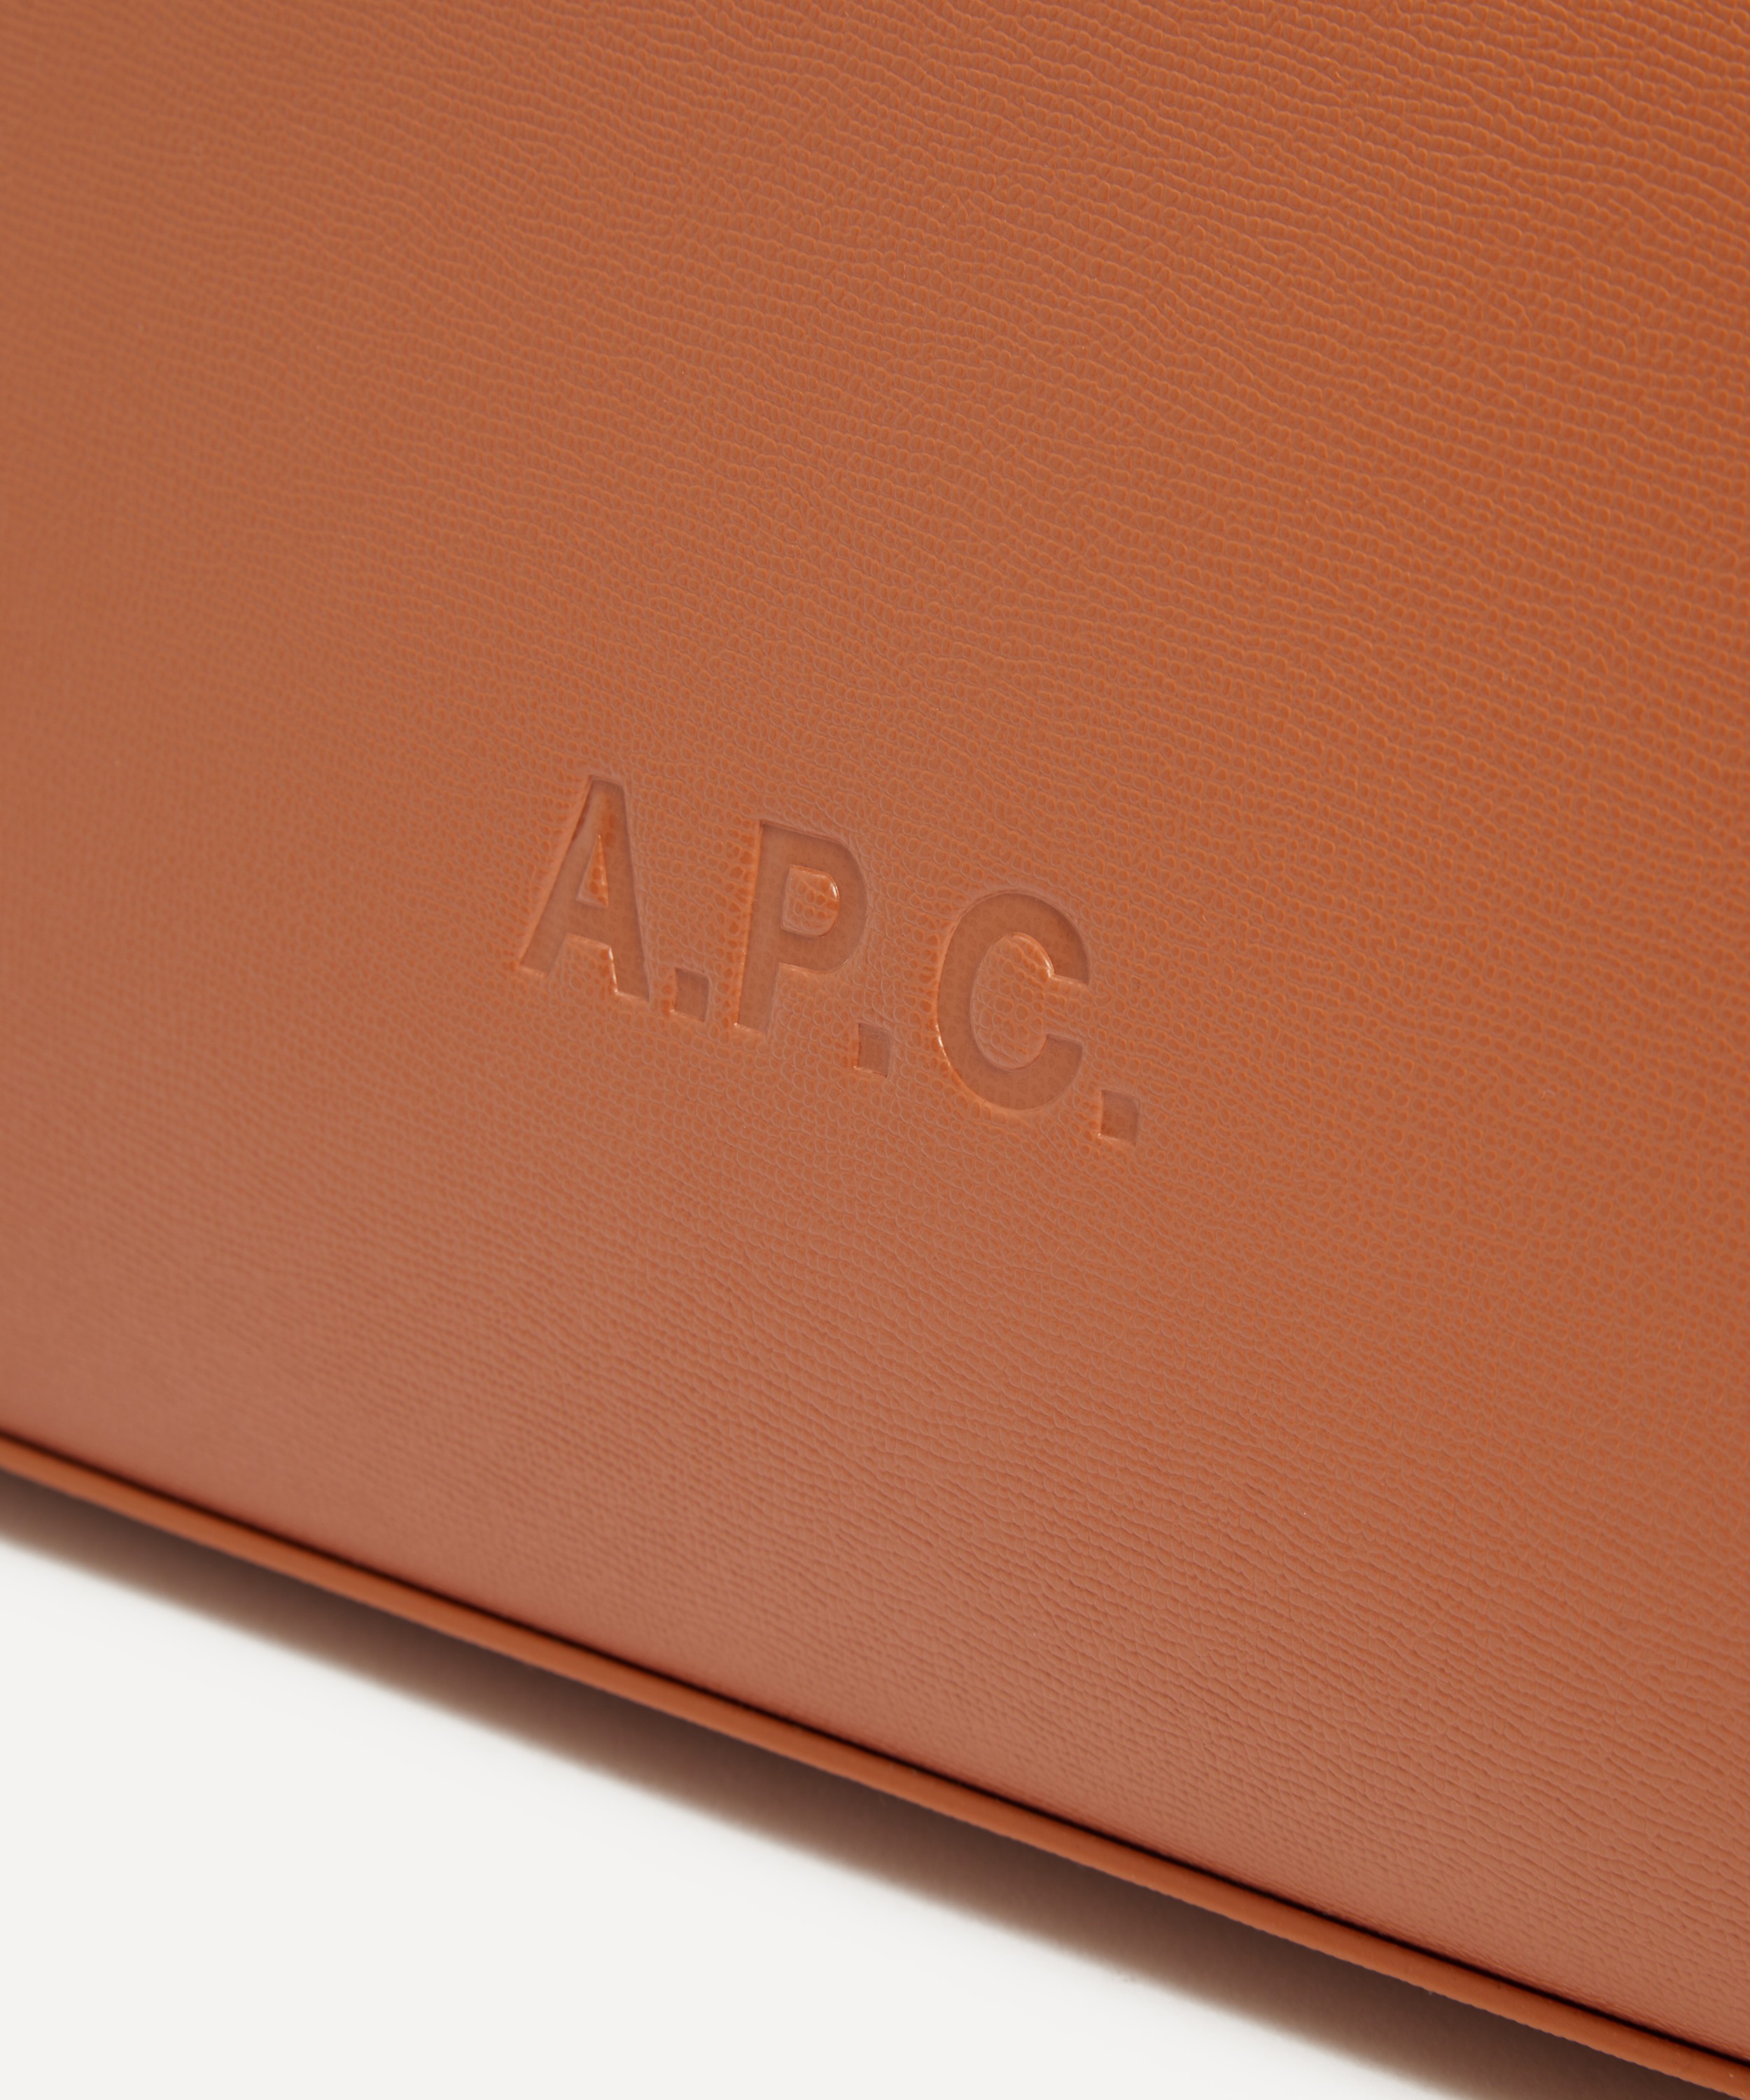 A.P.C. - Market Small Shopper Tote Bag image number 4